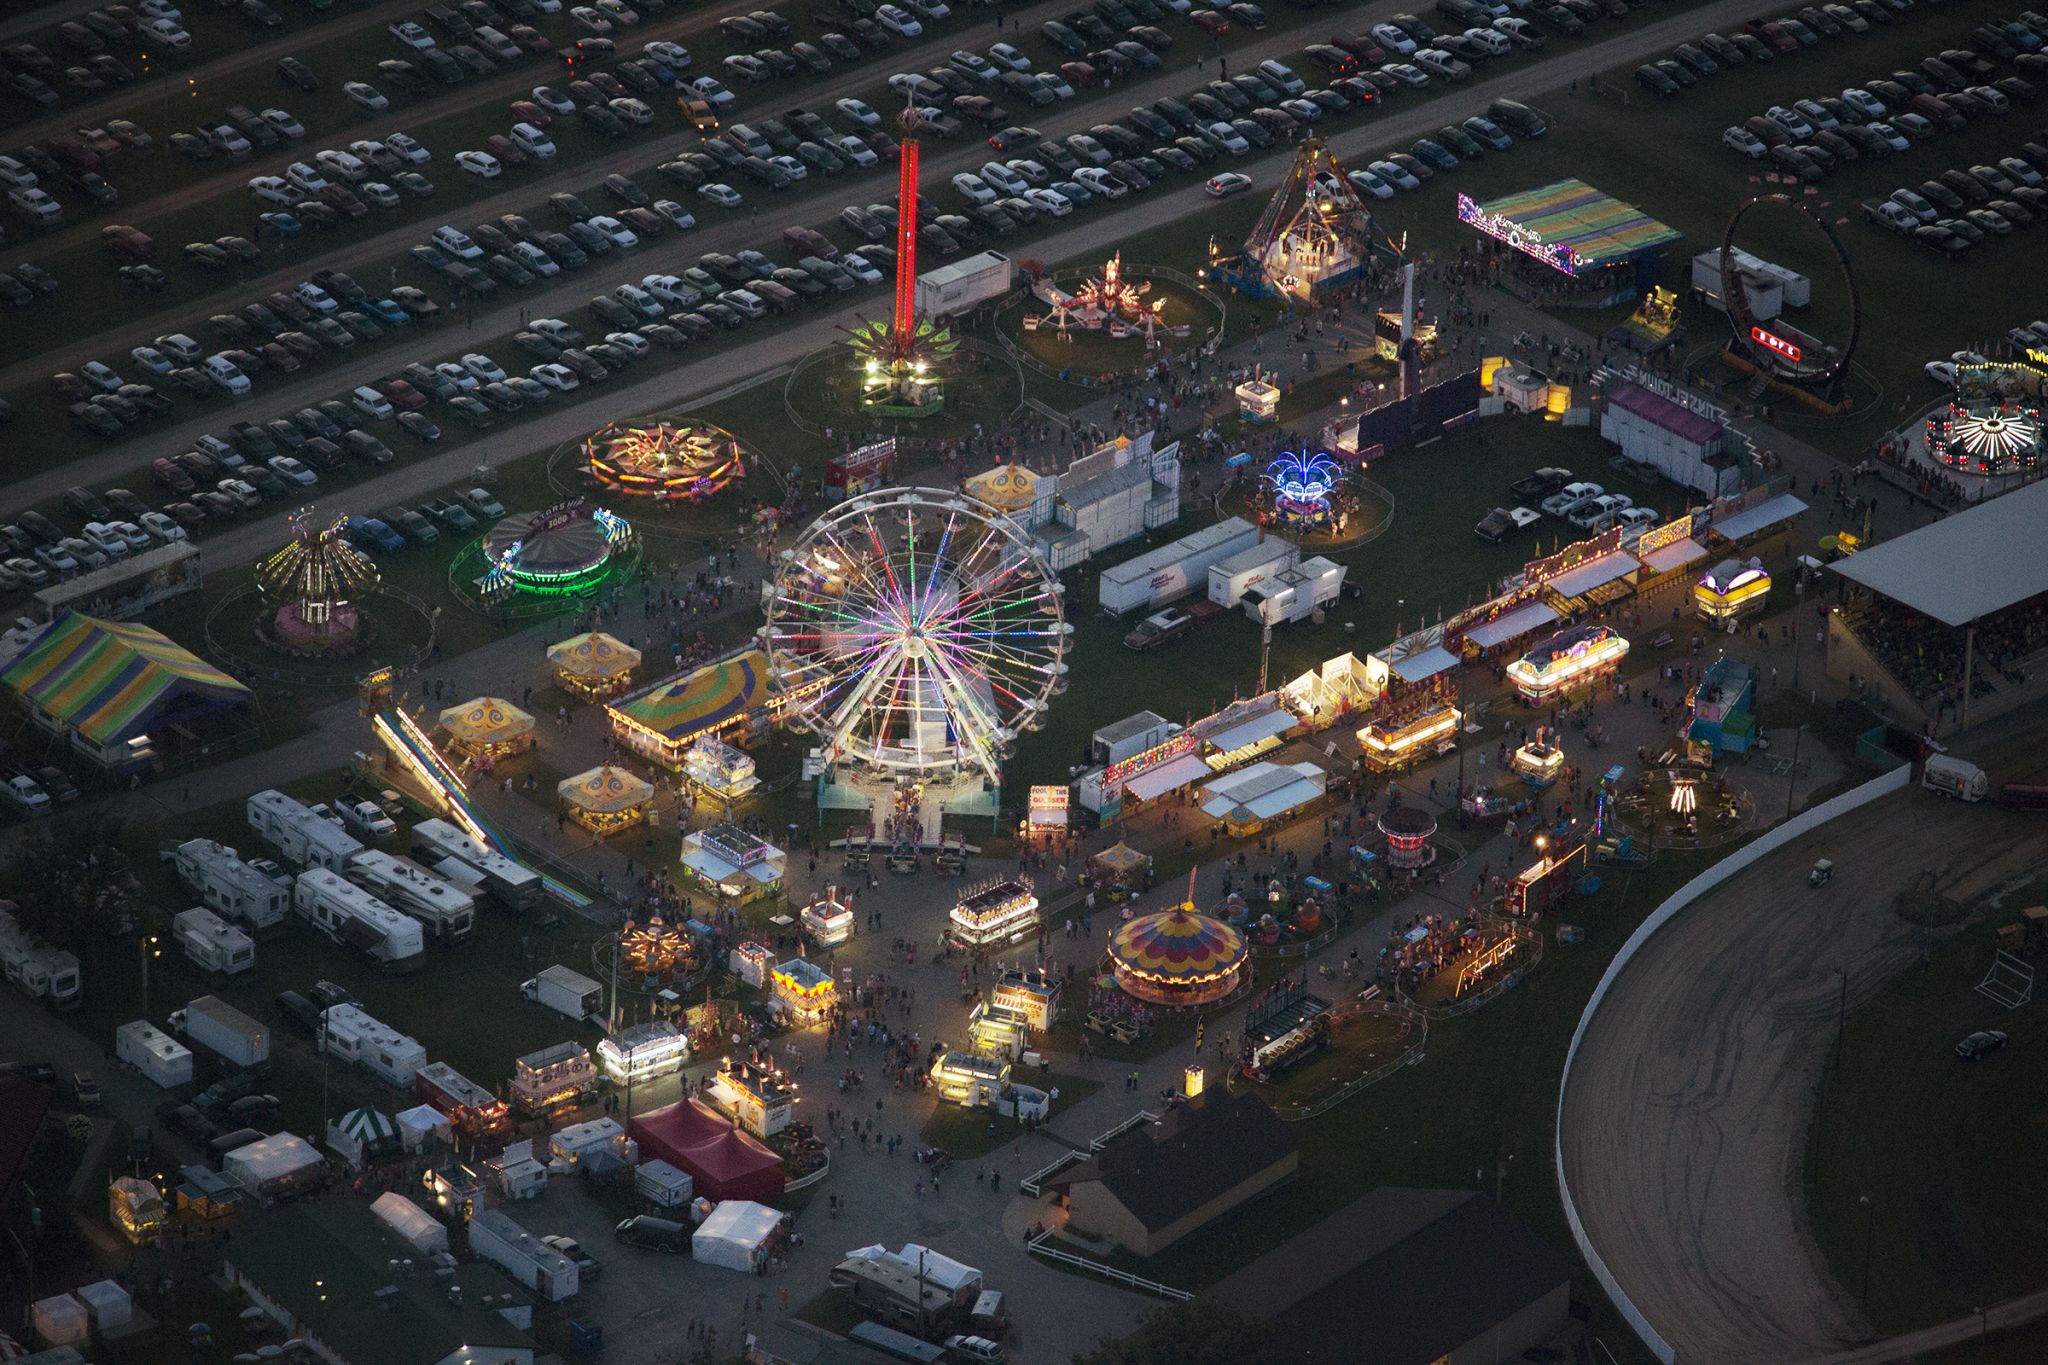 The Midland County Fair from above